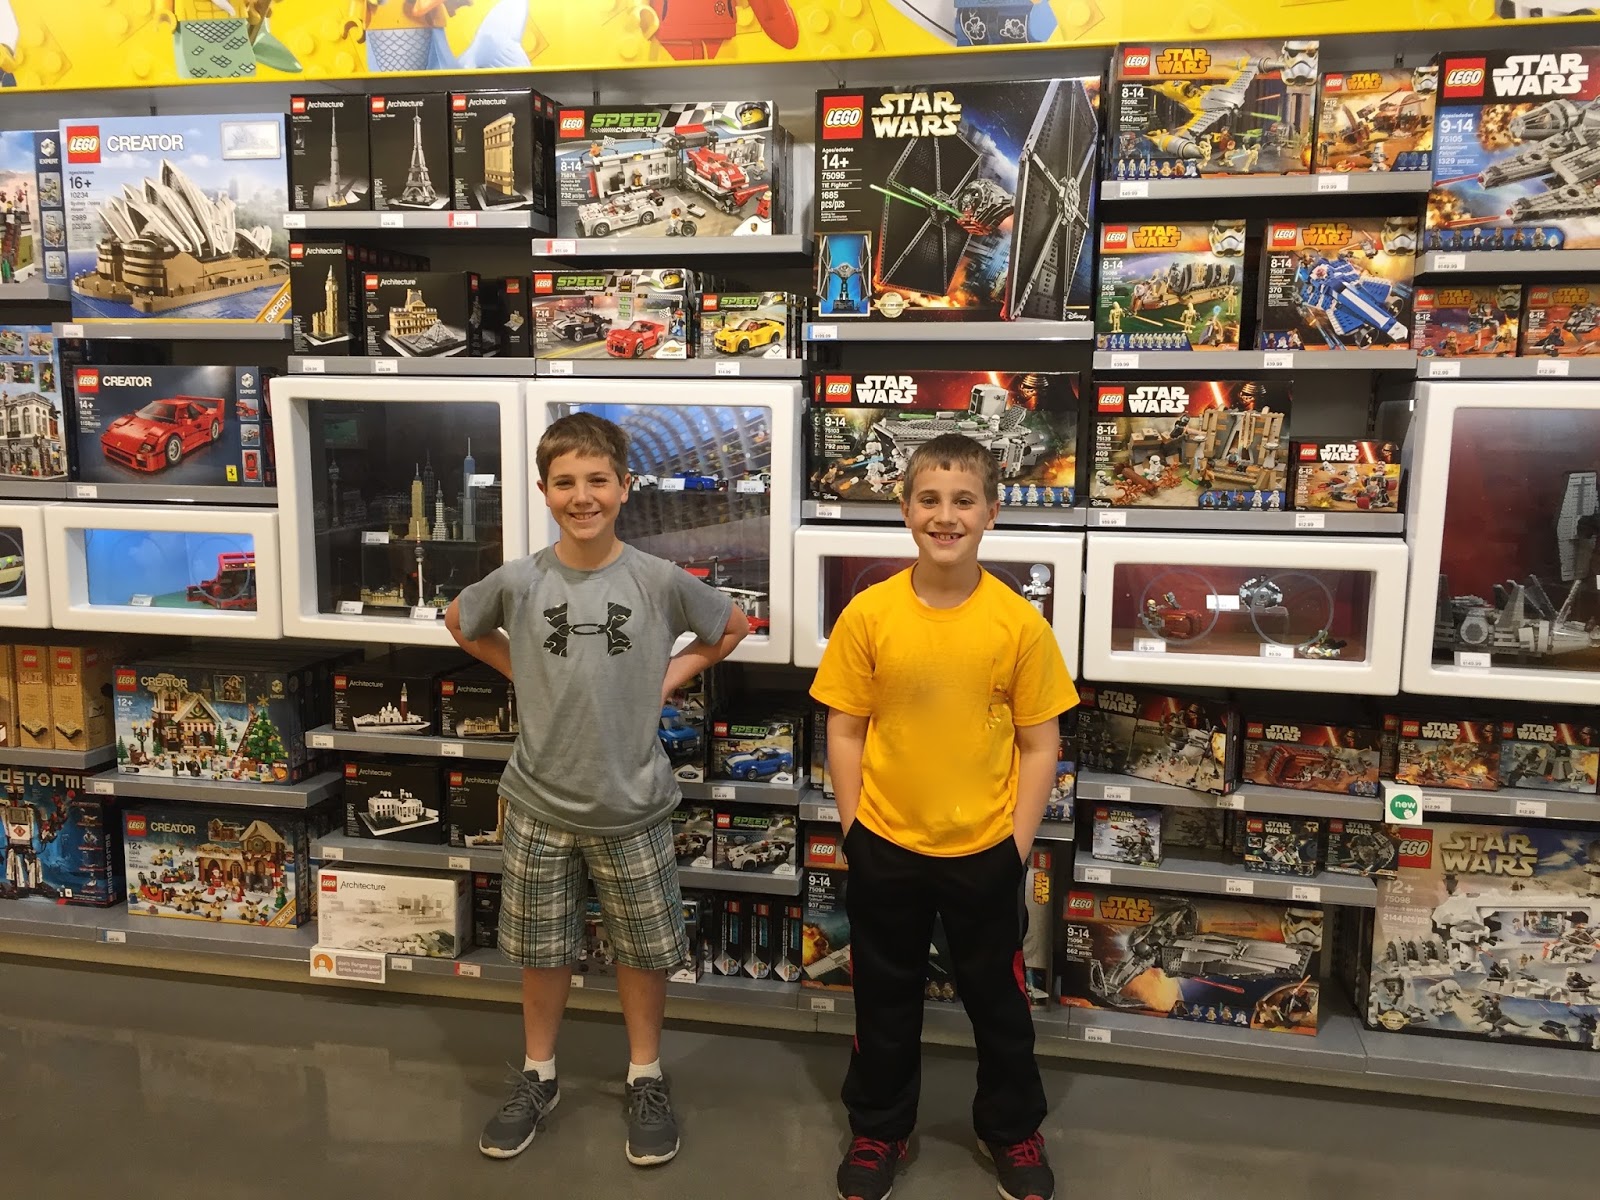 Runs for Cookies: A visit to the Lego store